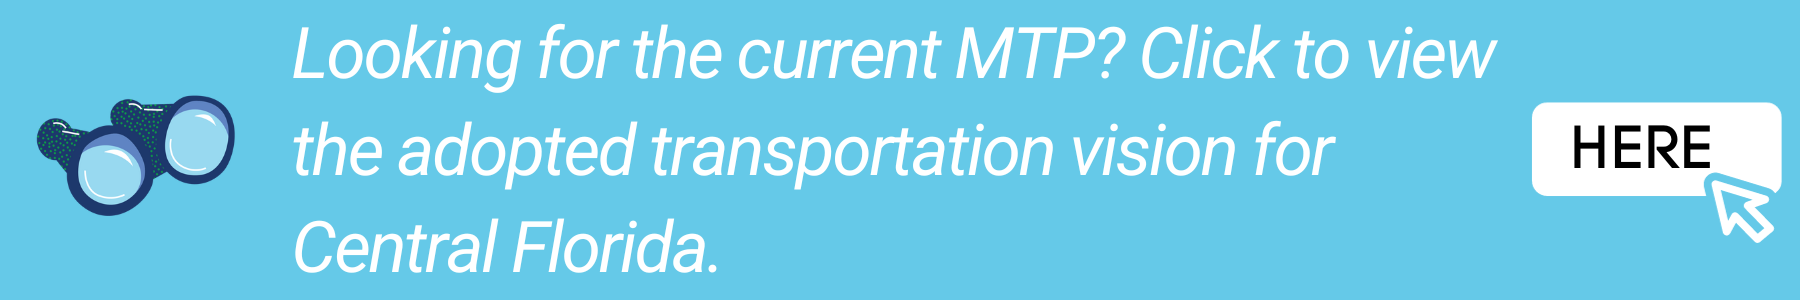 Looking for the current MTP? Click here to view the adopted transportation vision for Central Florida.